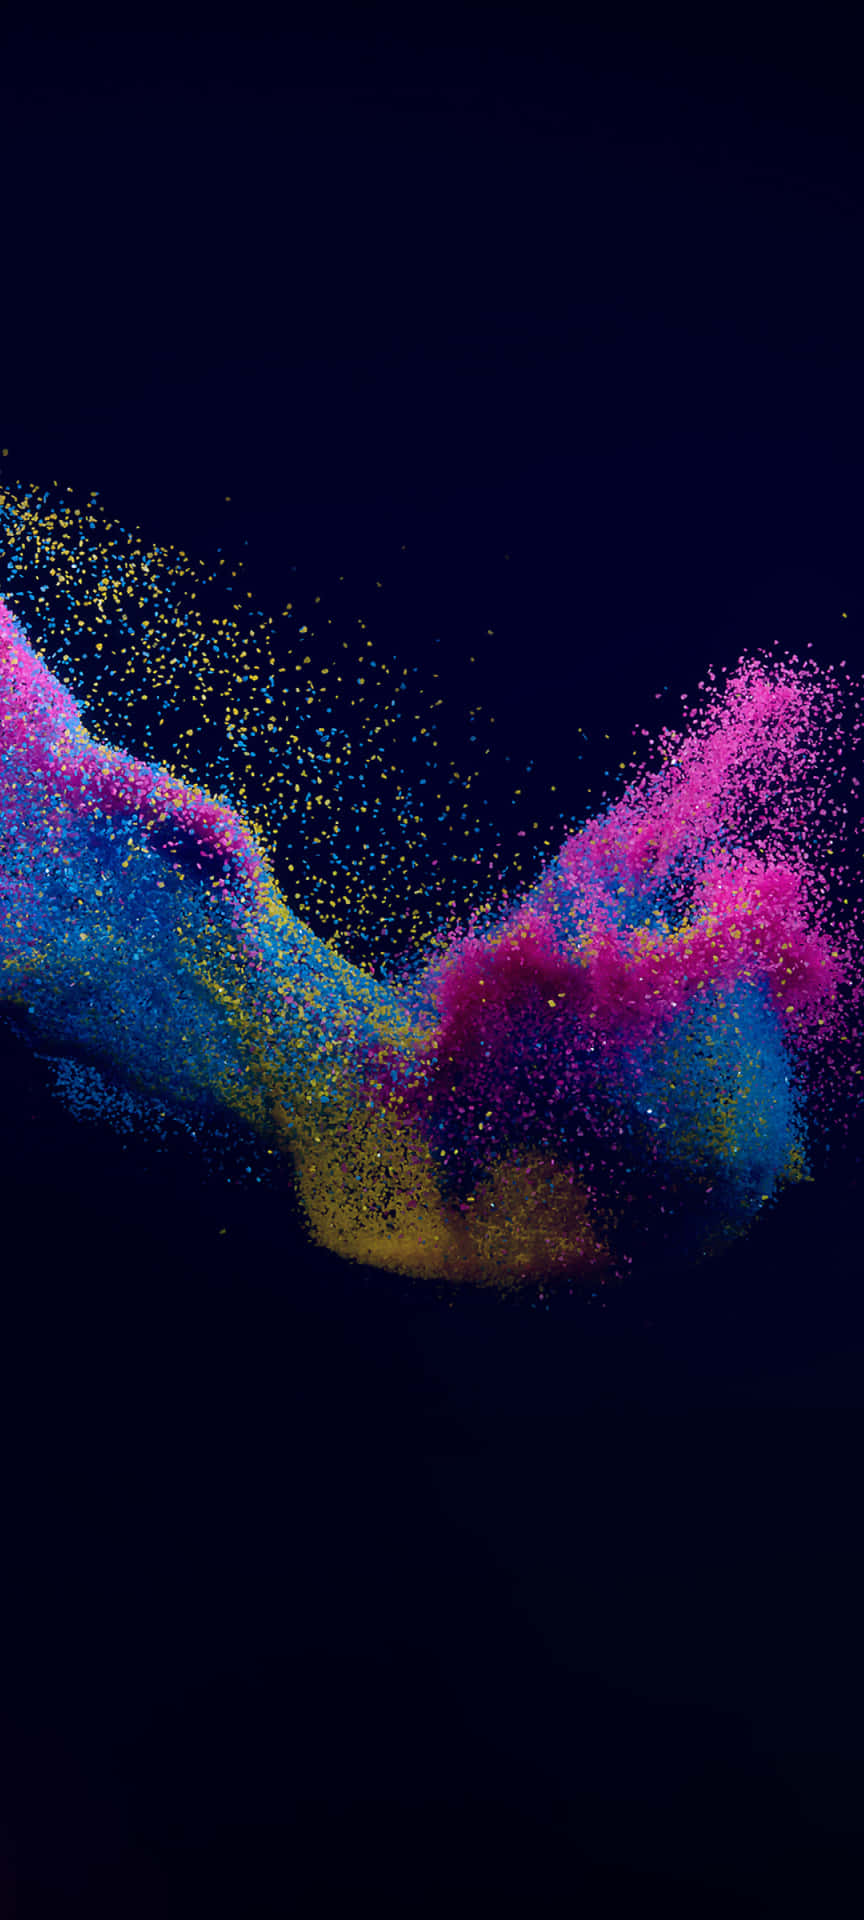 Colorful Powder Falling From The Sky